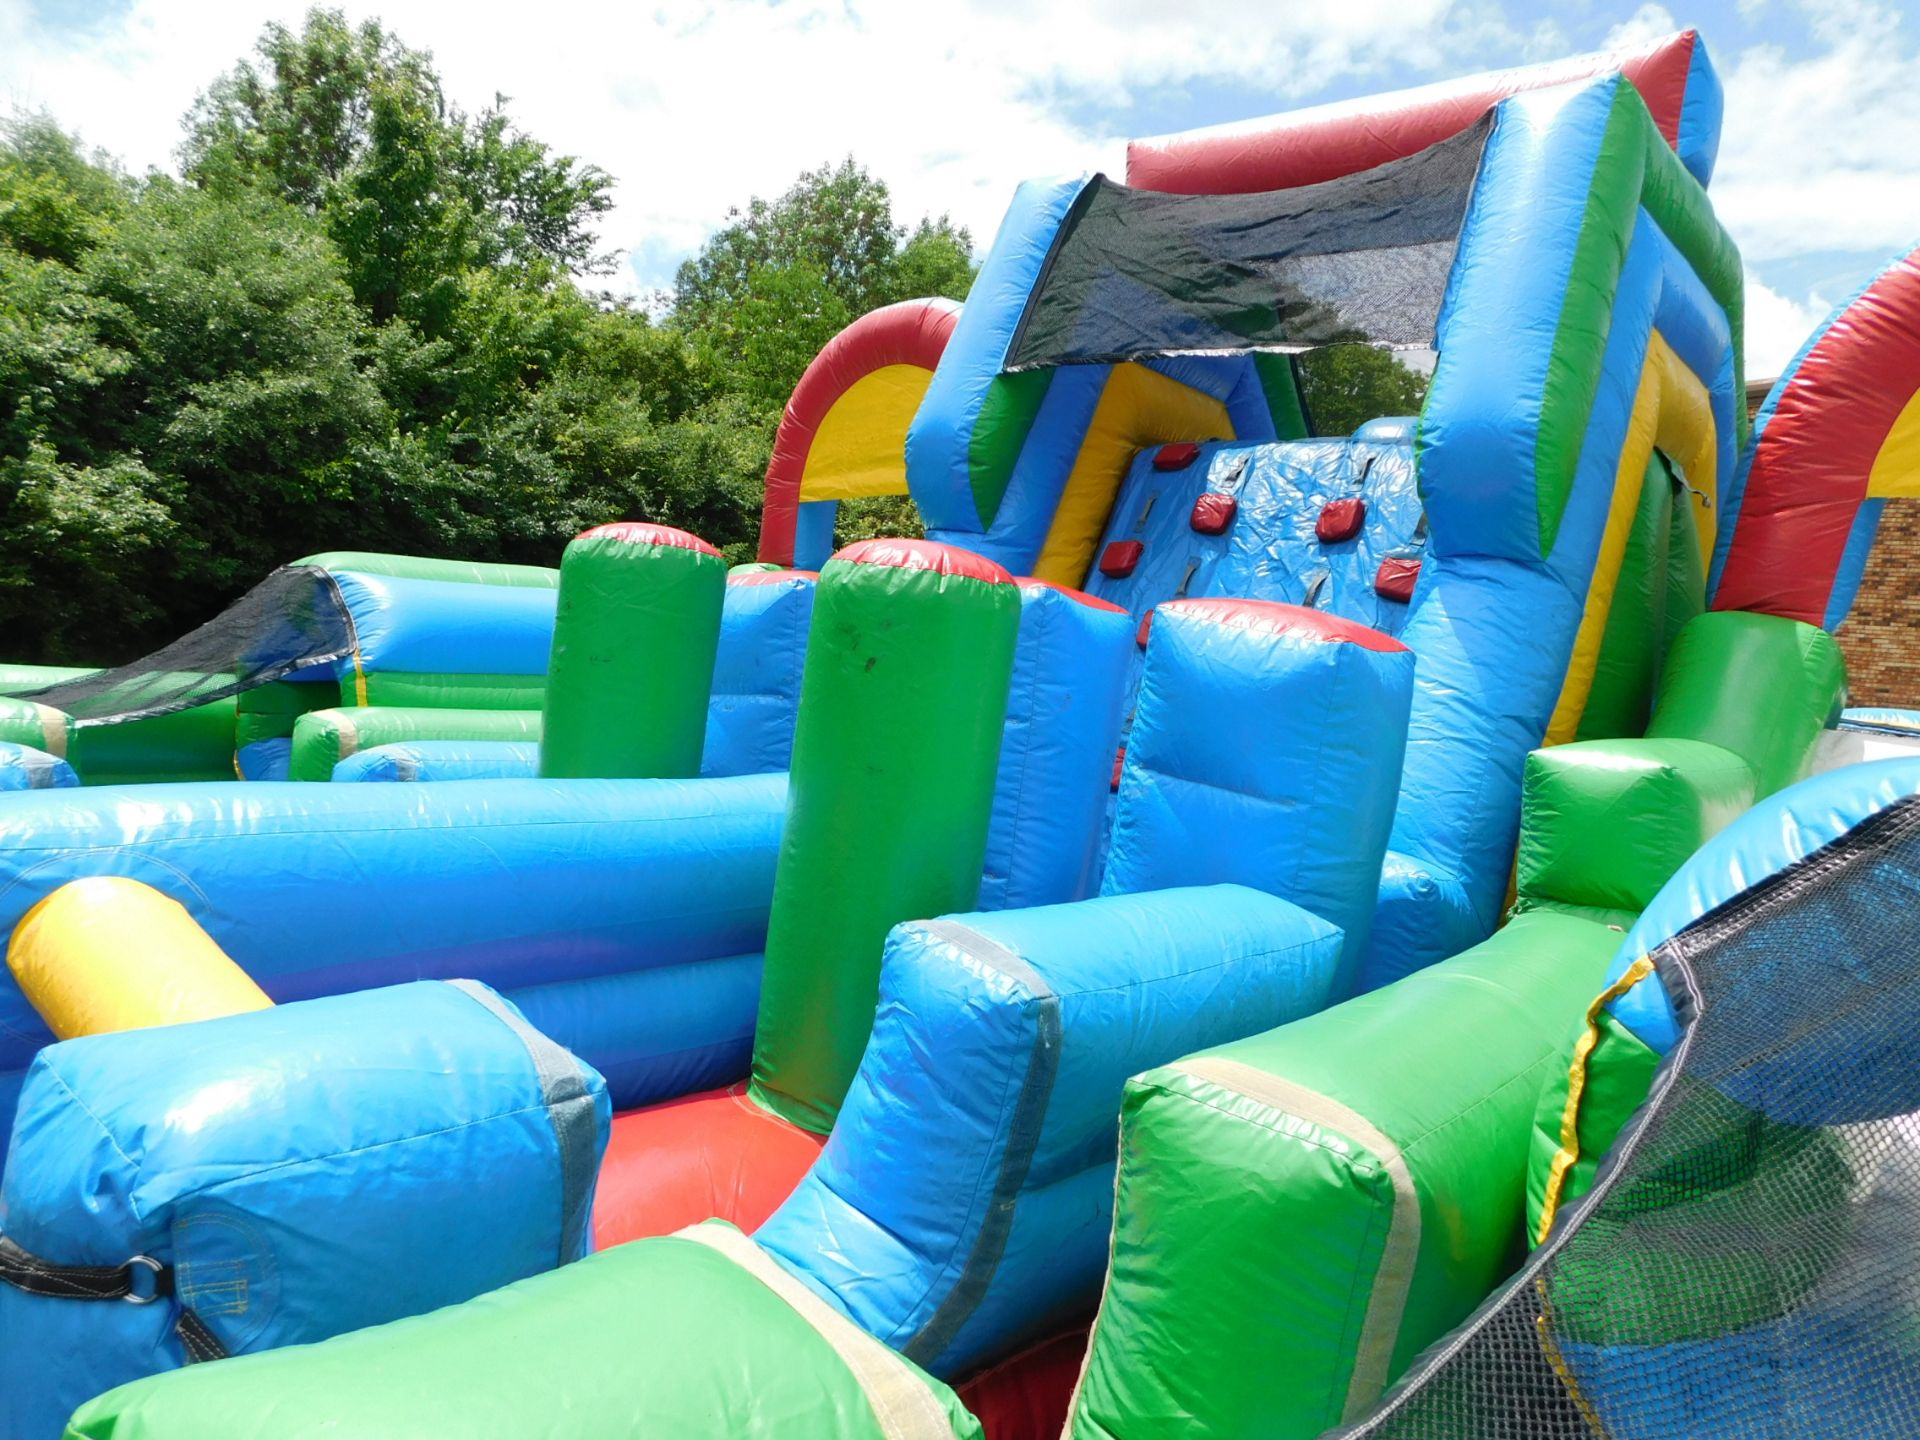 Inflatable Store "Adrenaline Rush" The Next Generation 3 piece Inflatable Obstacle Course, 24'WX34' - Image 6 of 28